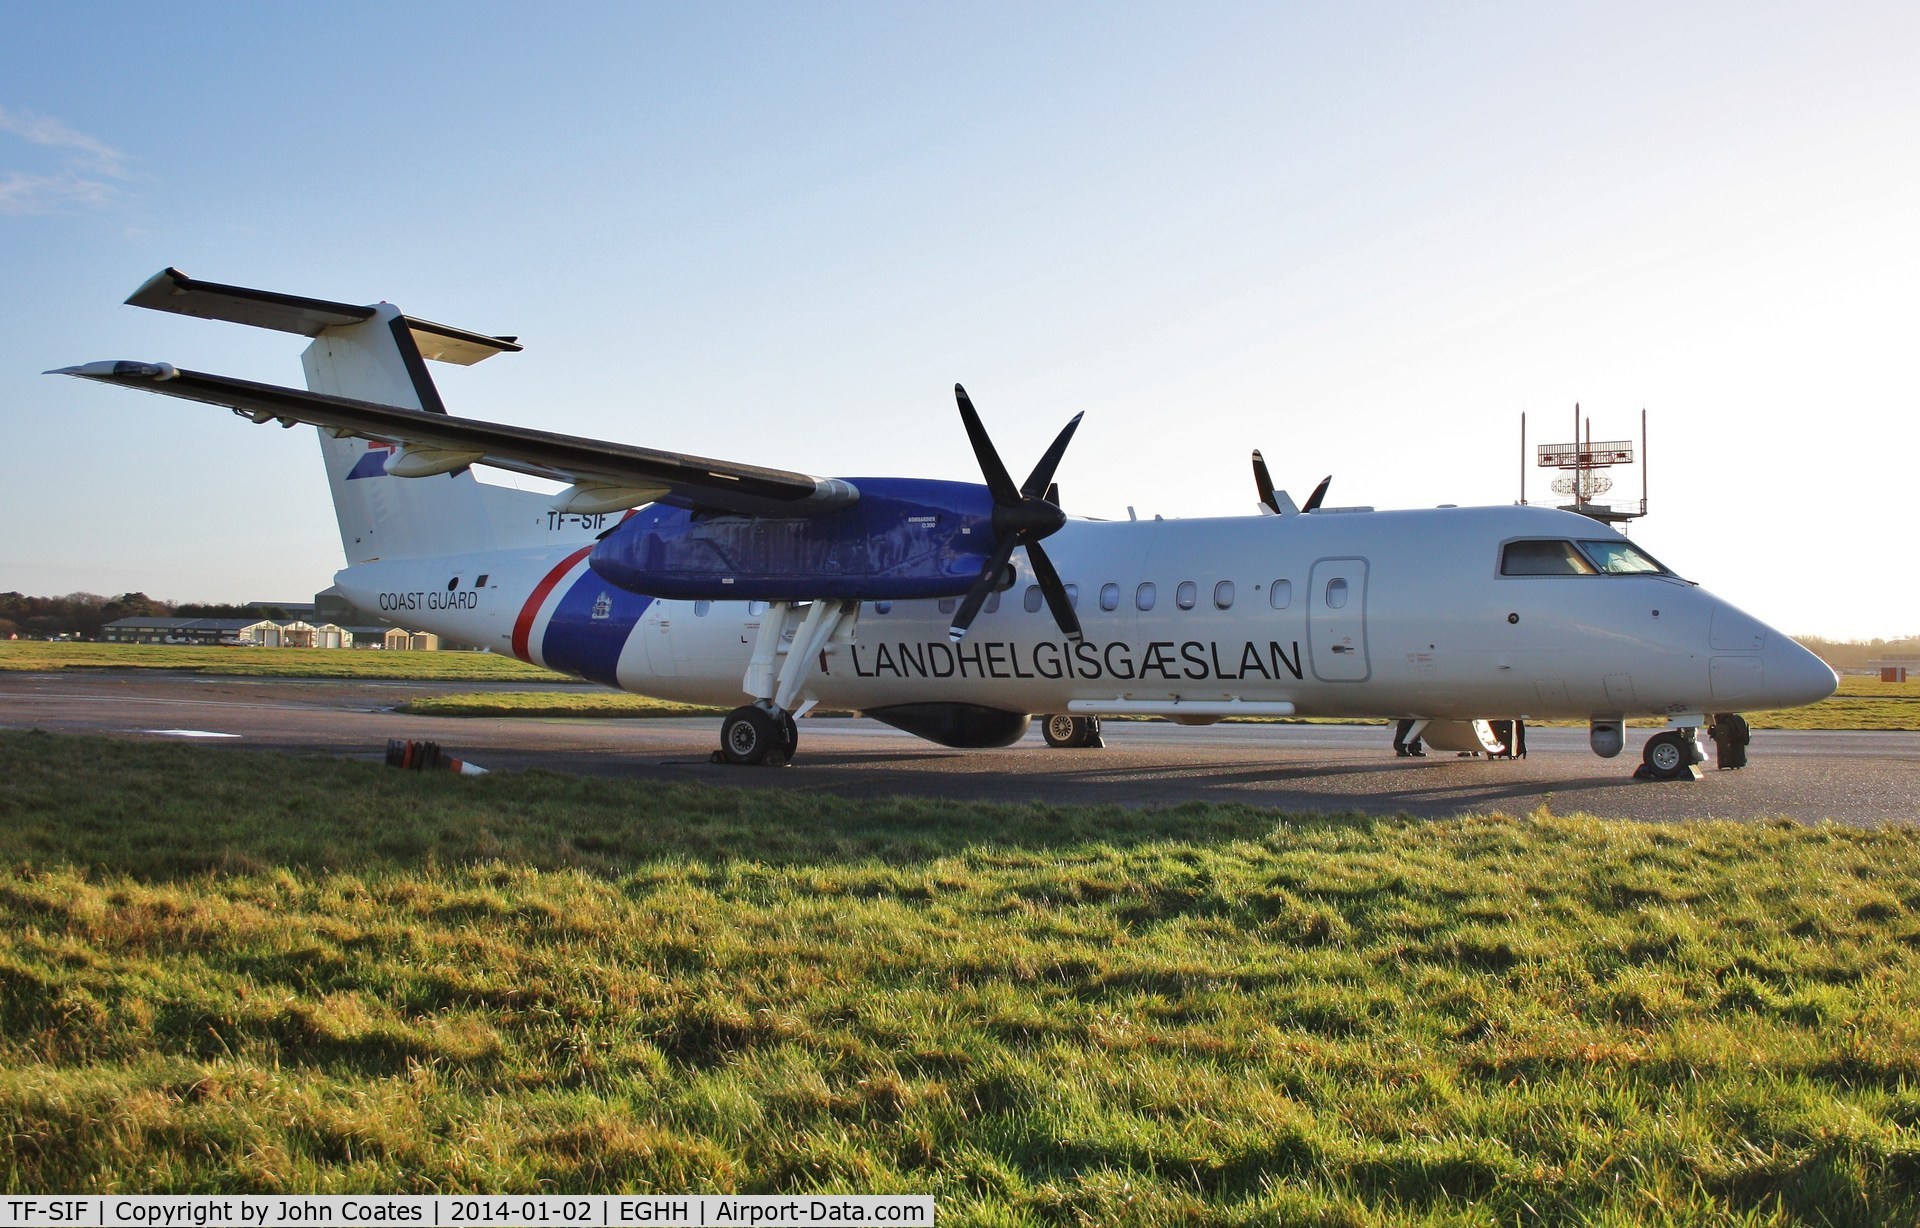 TF-SIF, 2008 De Havilland Canada DHC-8-314 Dash 8 C/N 660, Overnight stay at Signatures on way home from Sicily